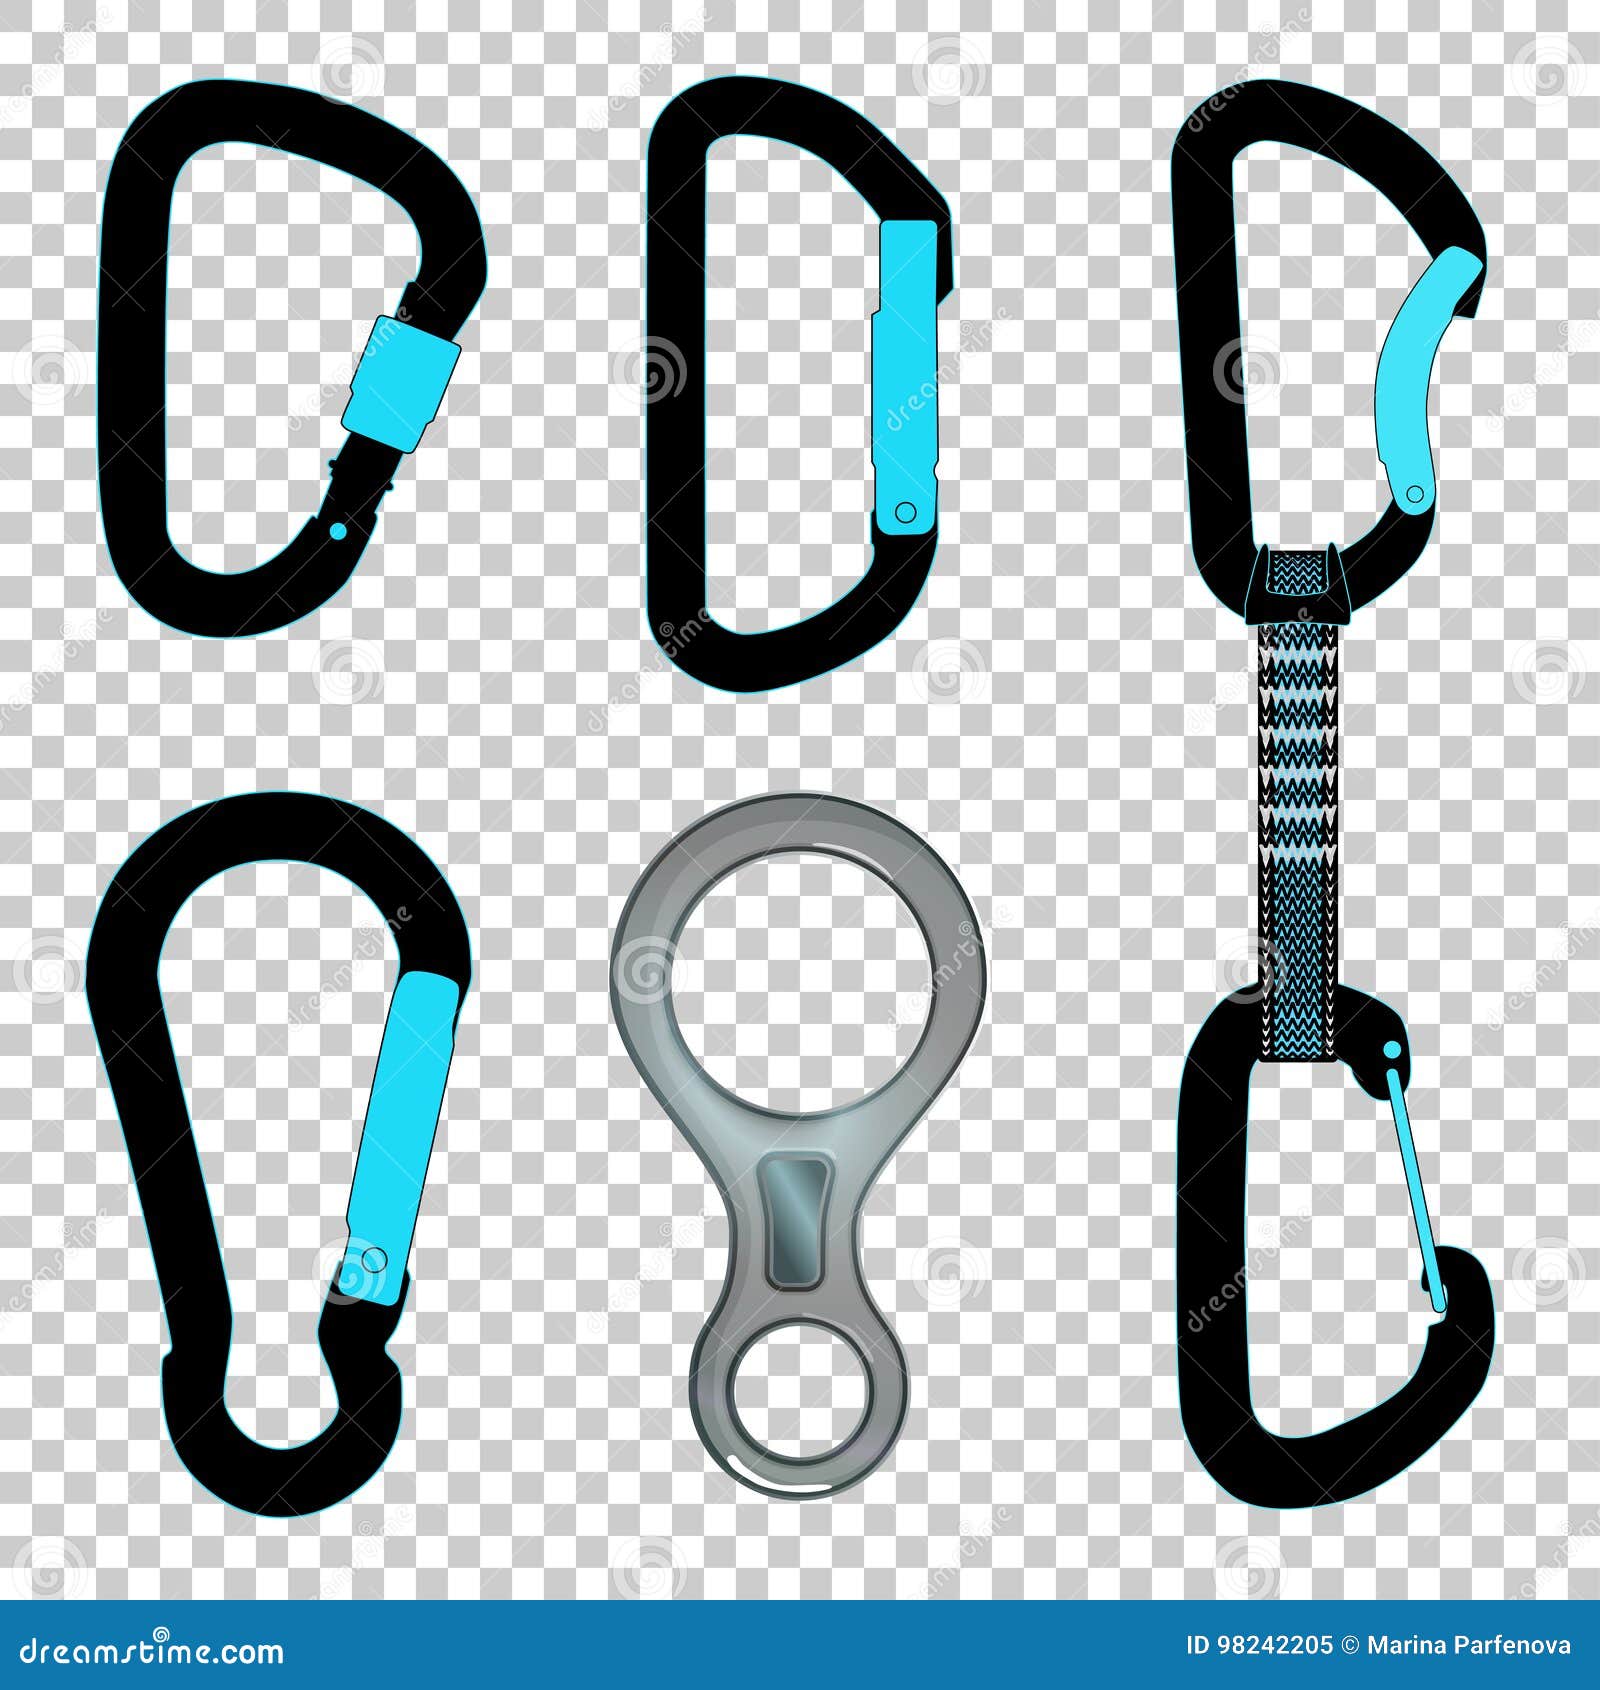 climbing carabiners set quickdraw and figure eight descender